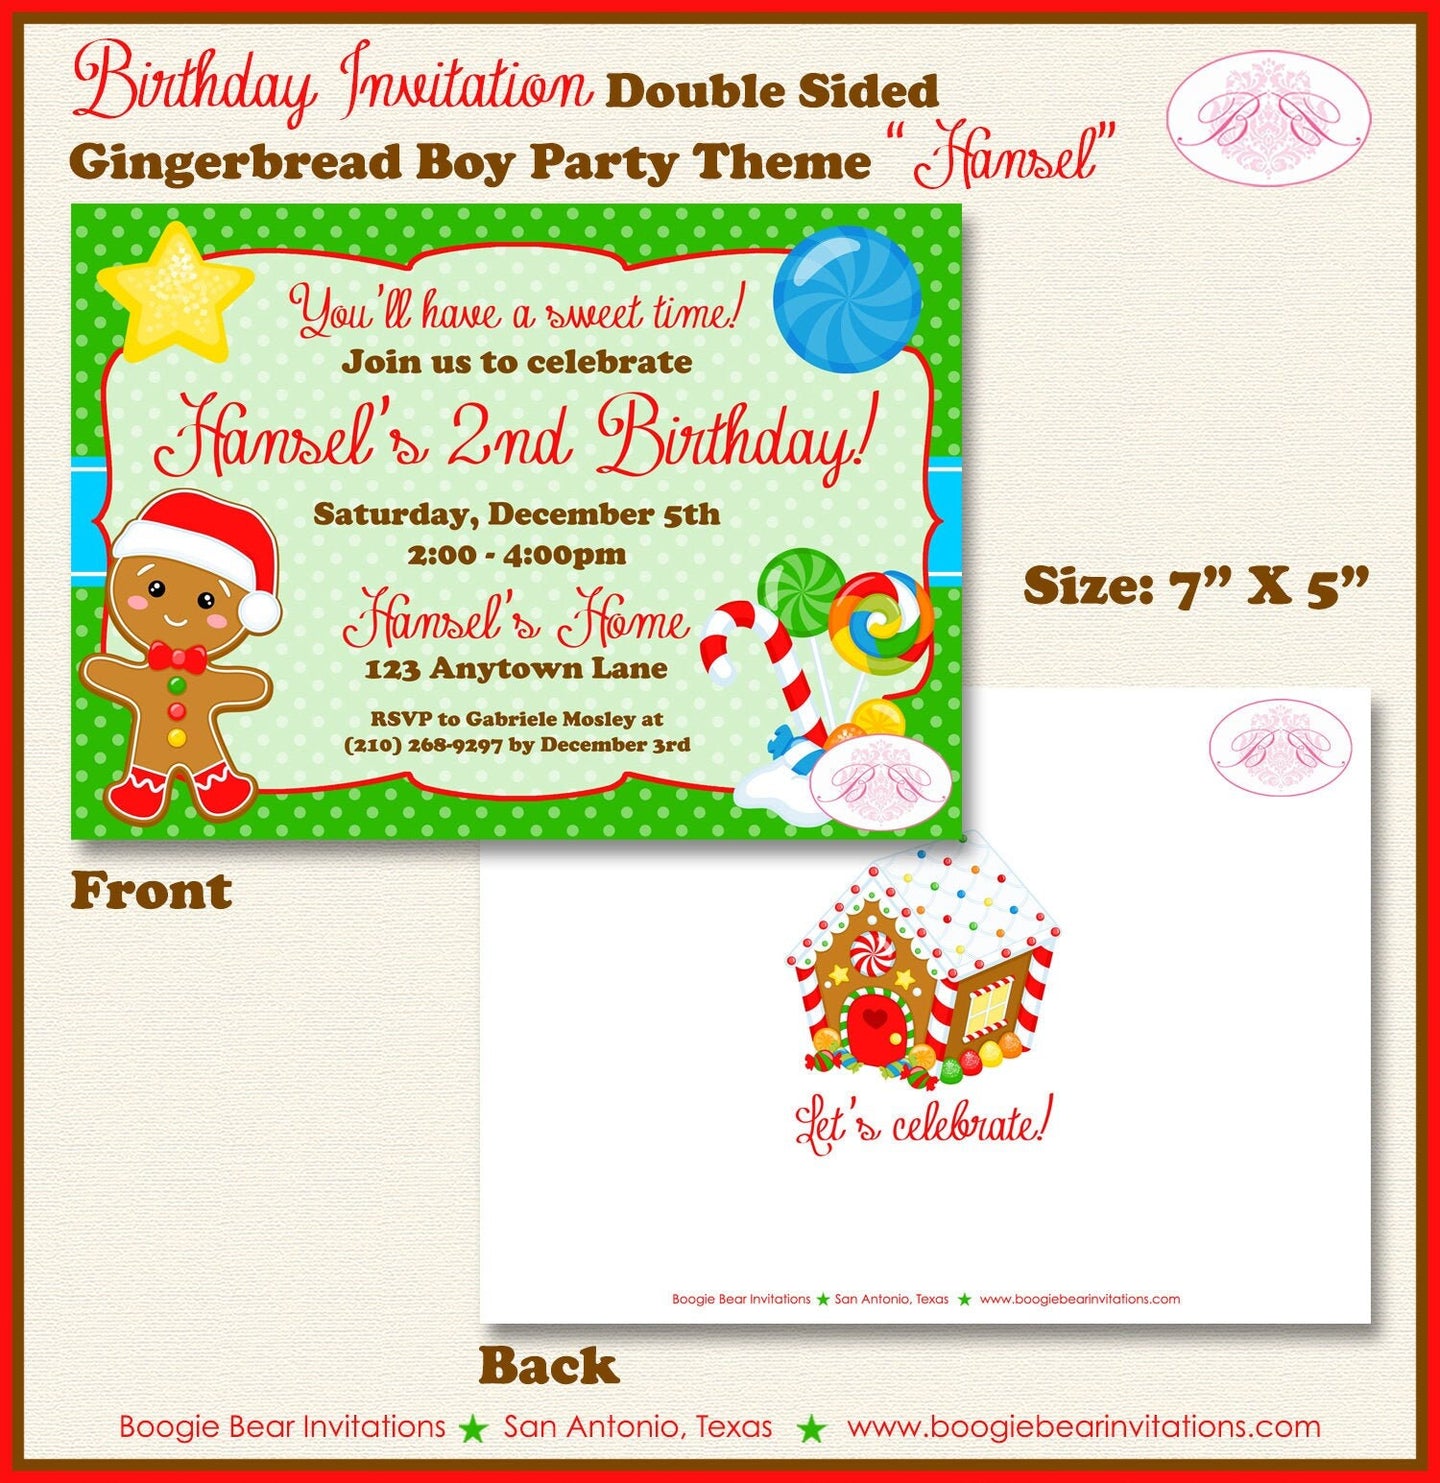 Gingerbread Boy Birthday Party Invitation Winter Christmas House Candy Boogie Bear Invitations Hansel Theme Paperless Printable Printed